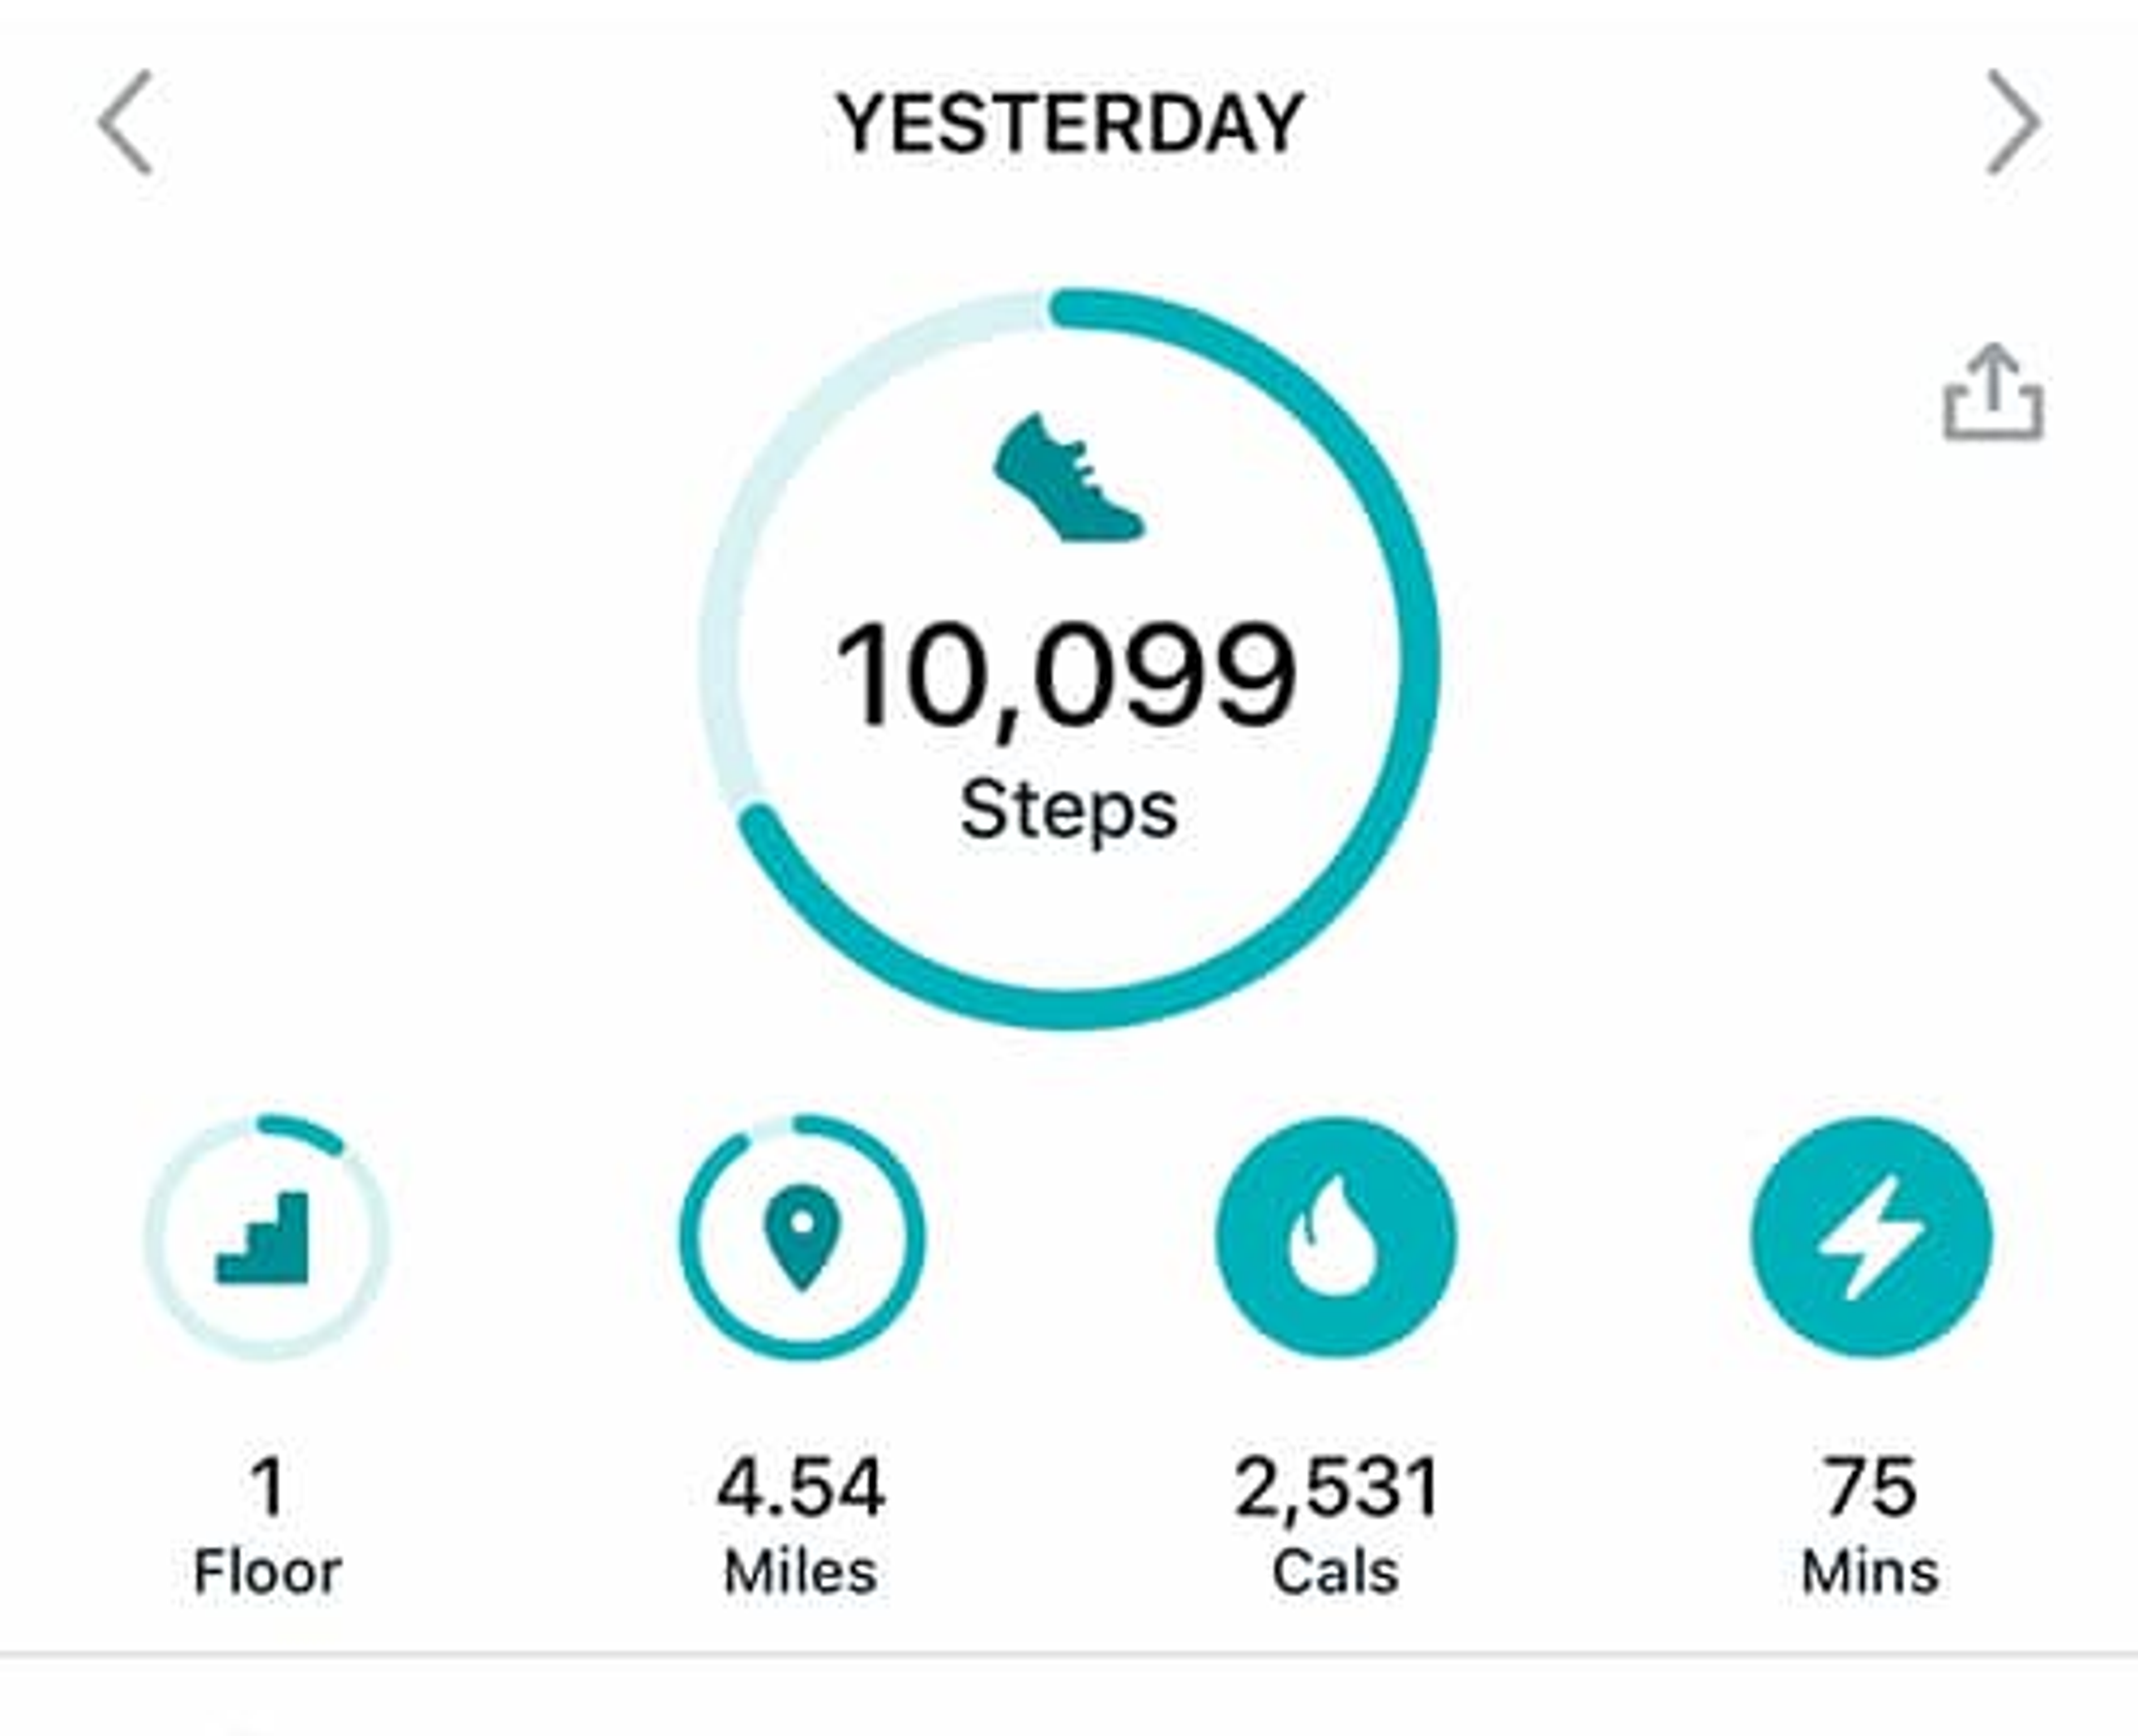 FitBit's gamification system